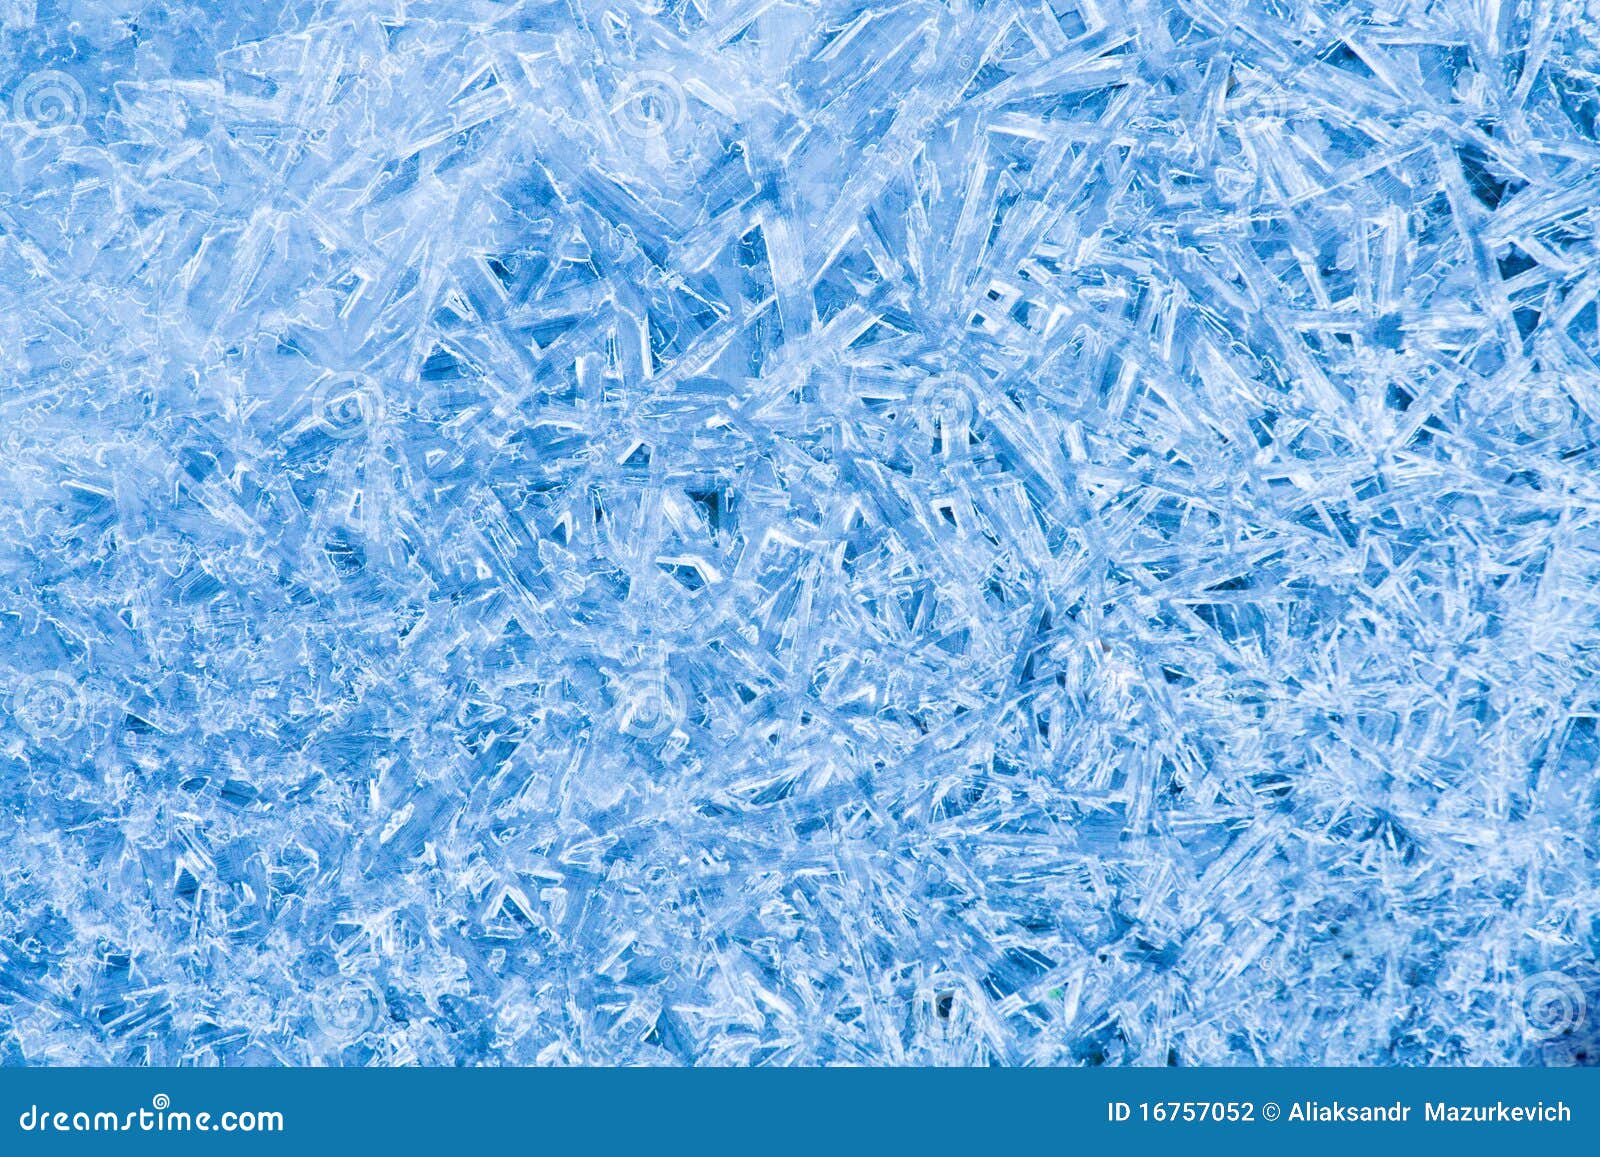 Ice Crystals Texture Background Stock Photo - Image of 